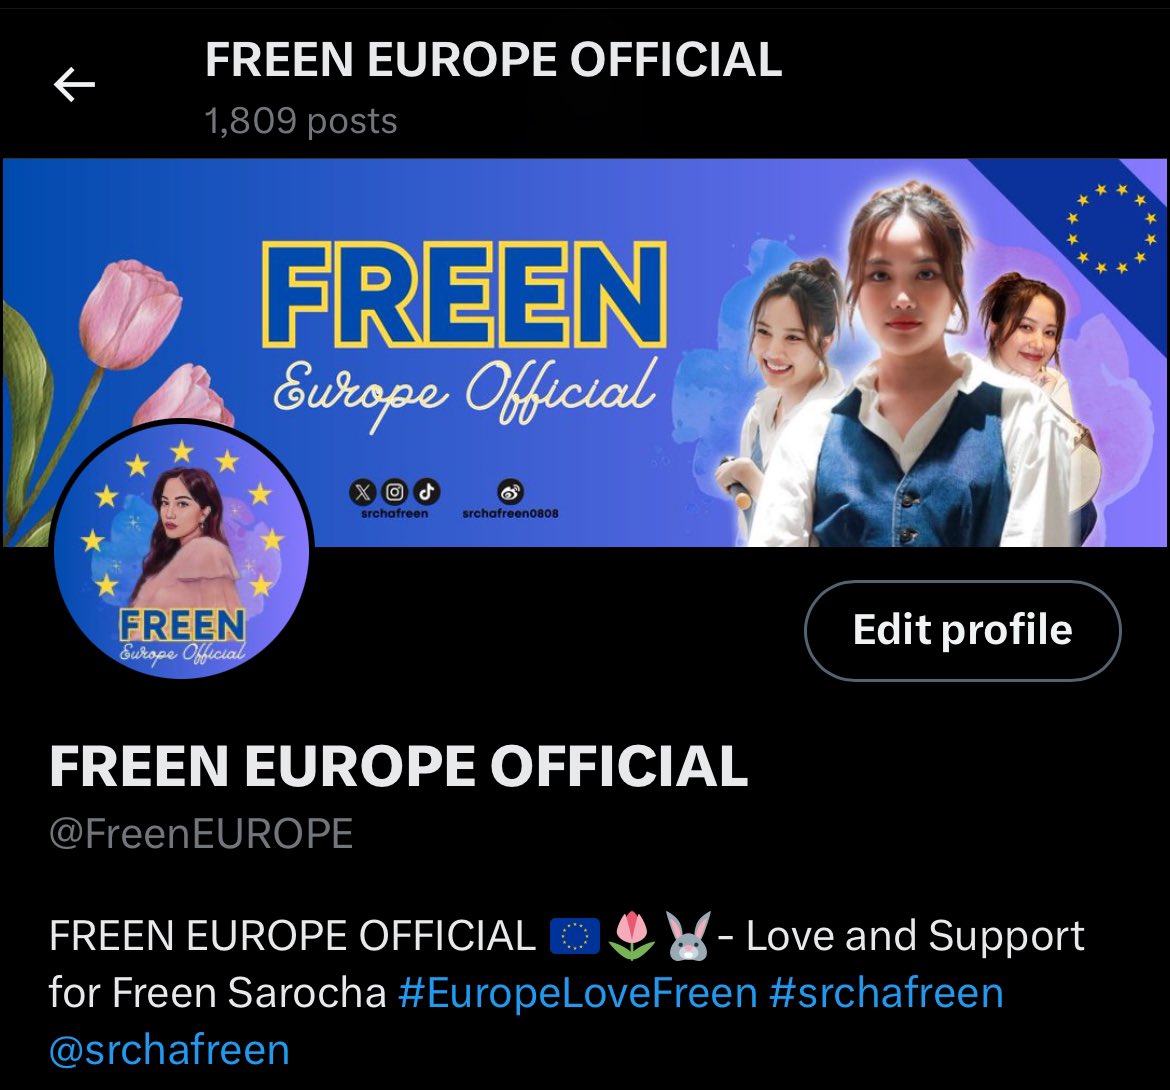 Girlfreens | Boyfreens and Freen Mamas, we’ve just unveiled a stunning new profile picture and header 💙 Freen’s beauty and talent now grace our page in a whole new light. Hope you like it fam🌷🫶🏻

#srchafreen #GIRLFREEN 
#NewProfilePic #NewHeaderPic